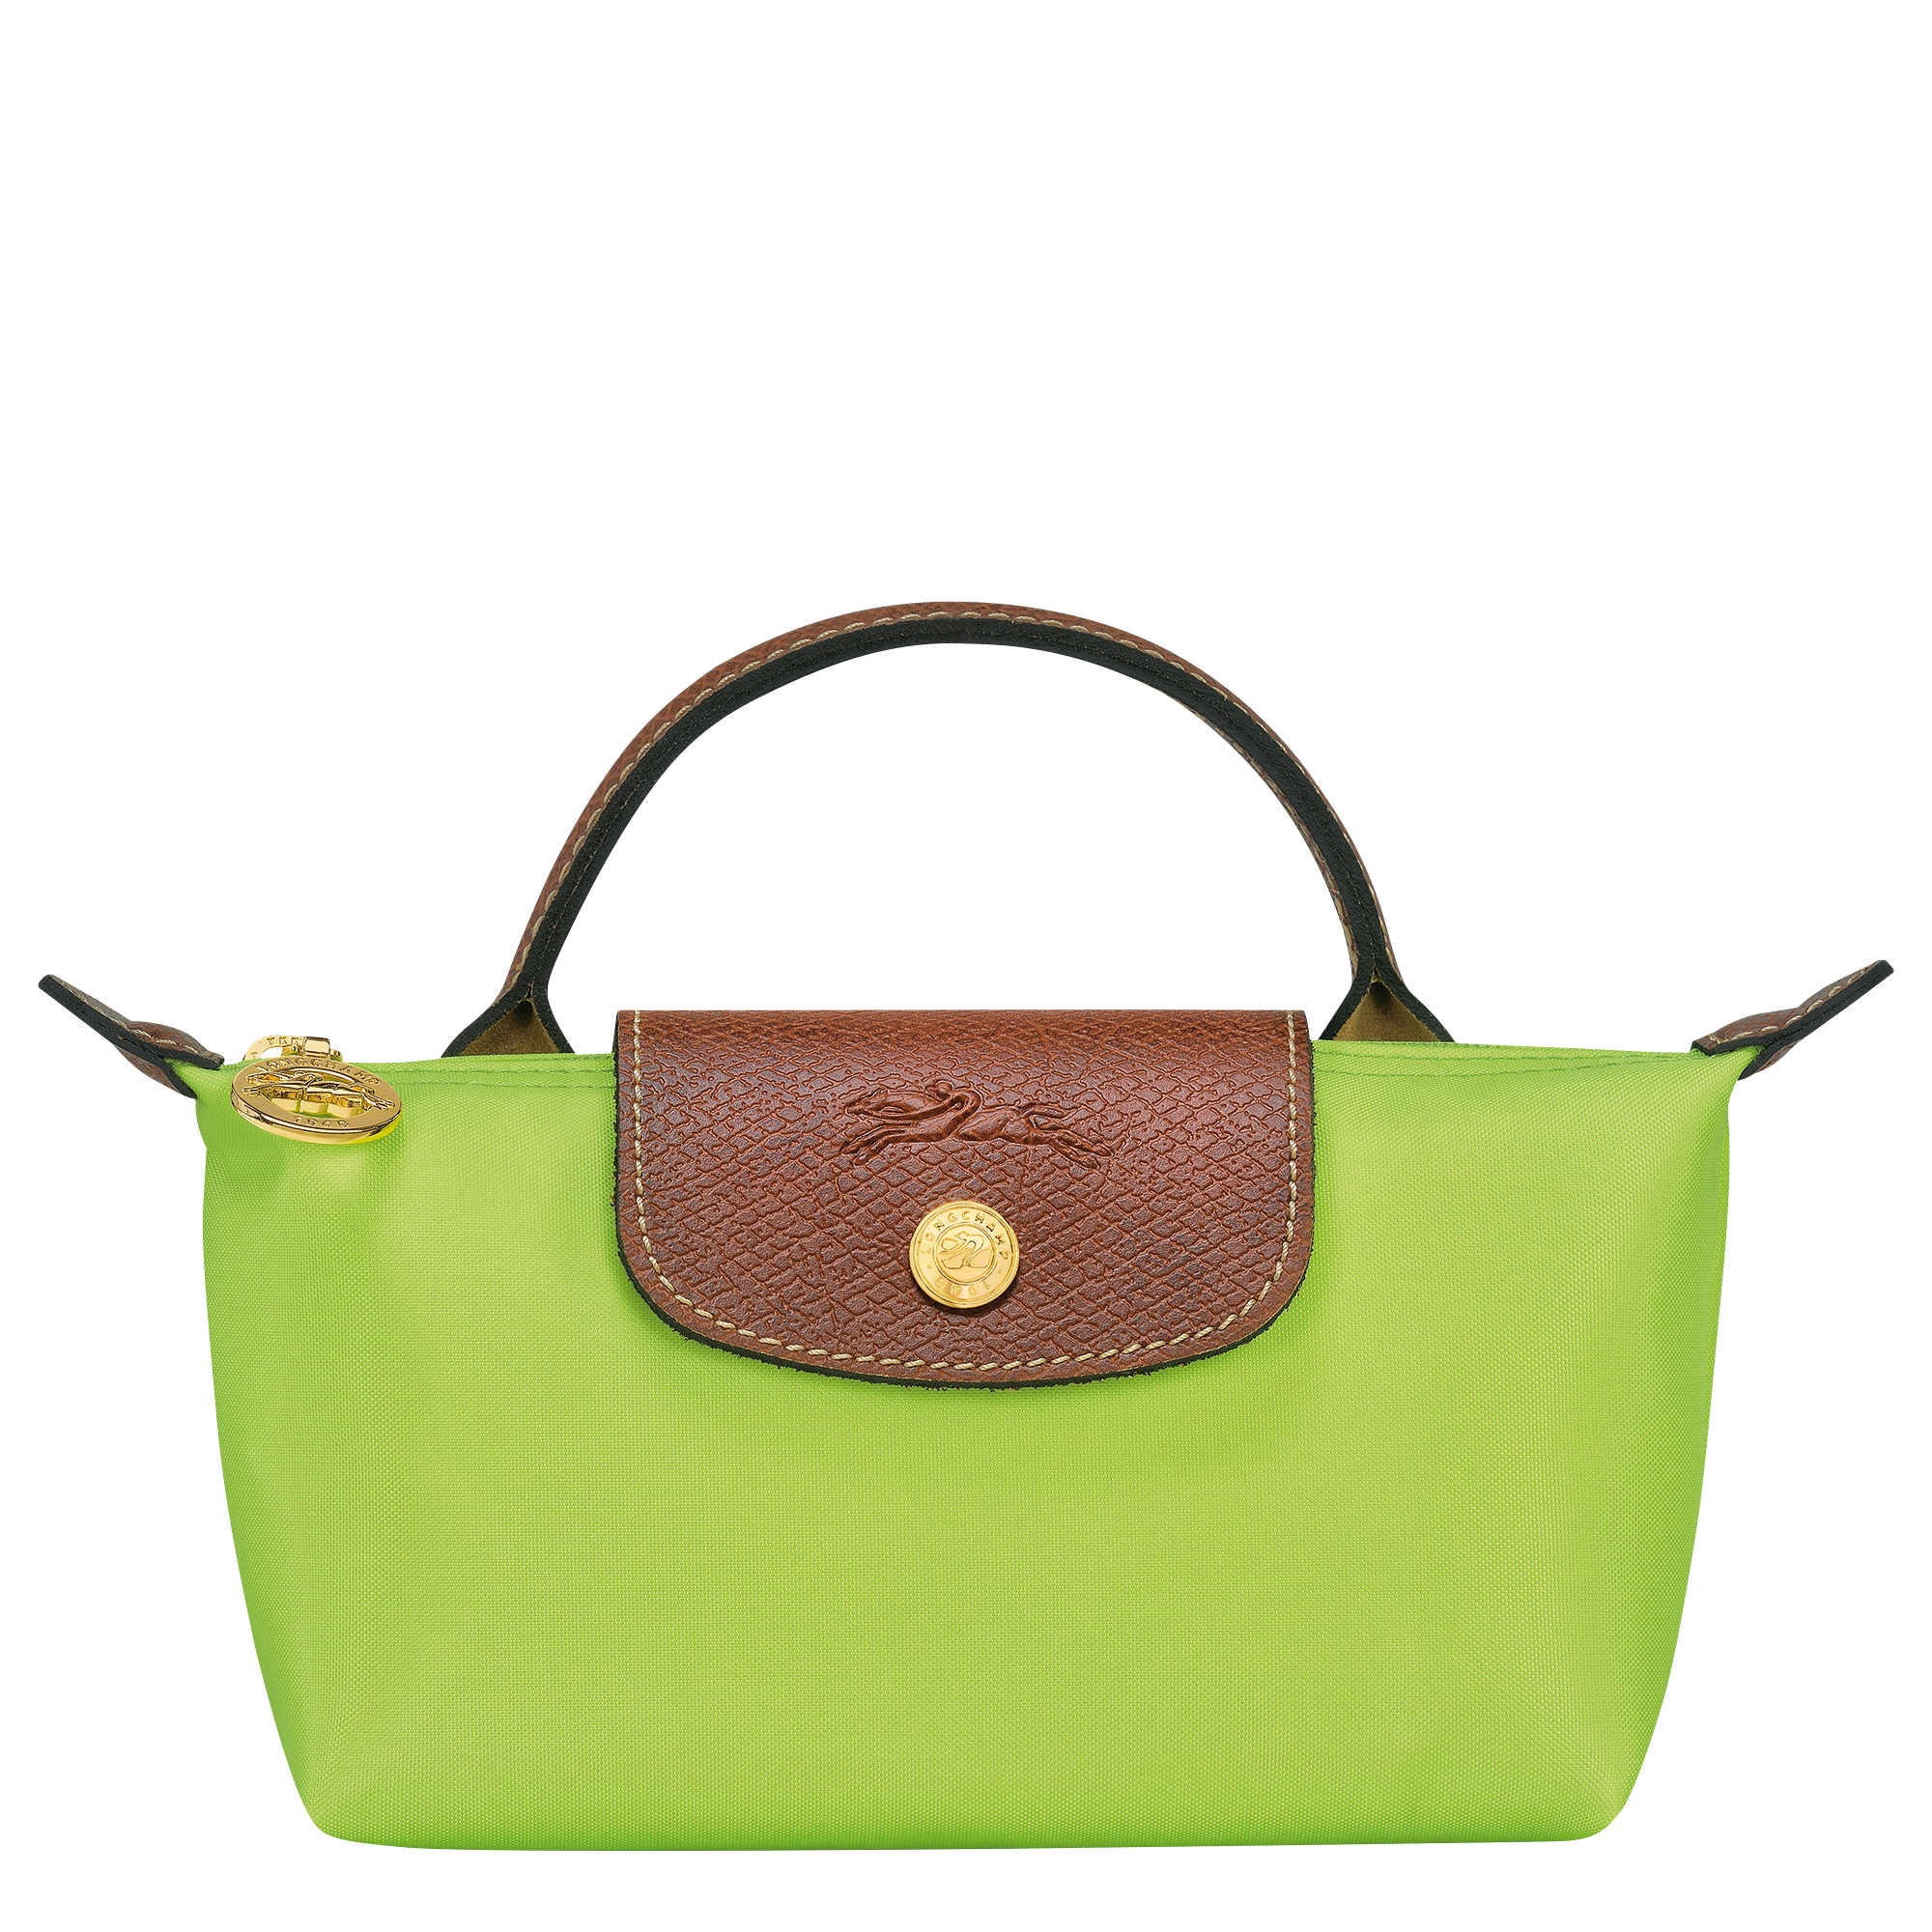 Longchamp LE PLIAGE ORIGINAL - Pouch with handle in Green Light - 1 (SKU: 34175089355)